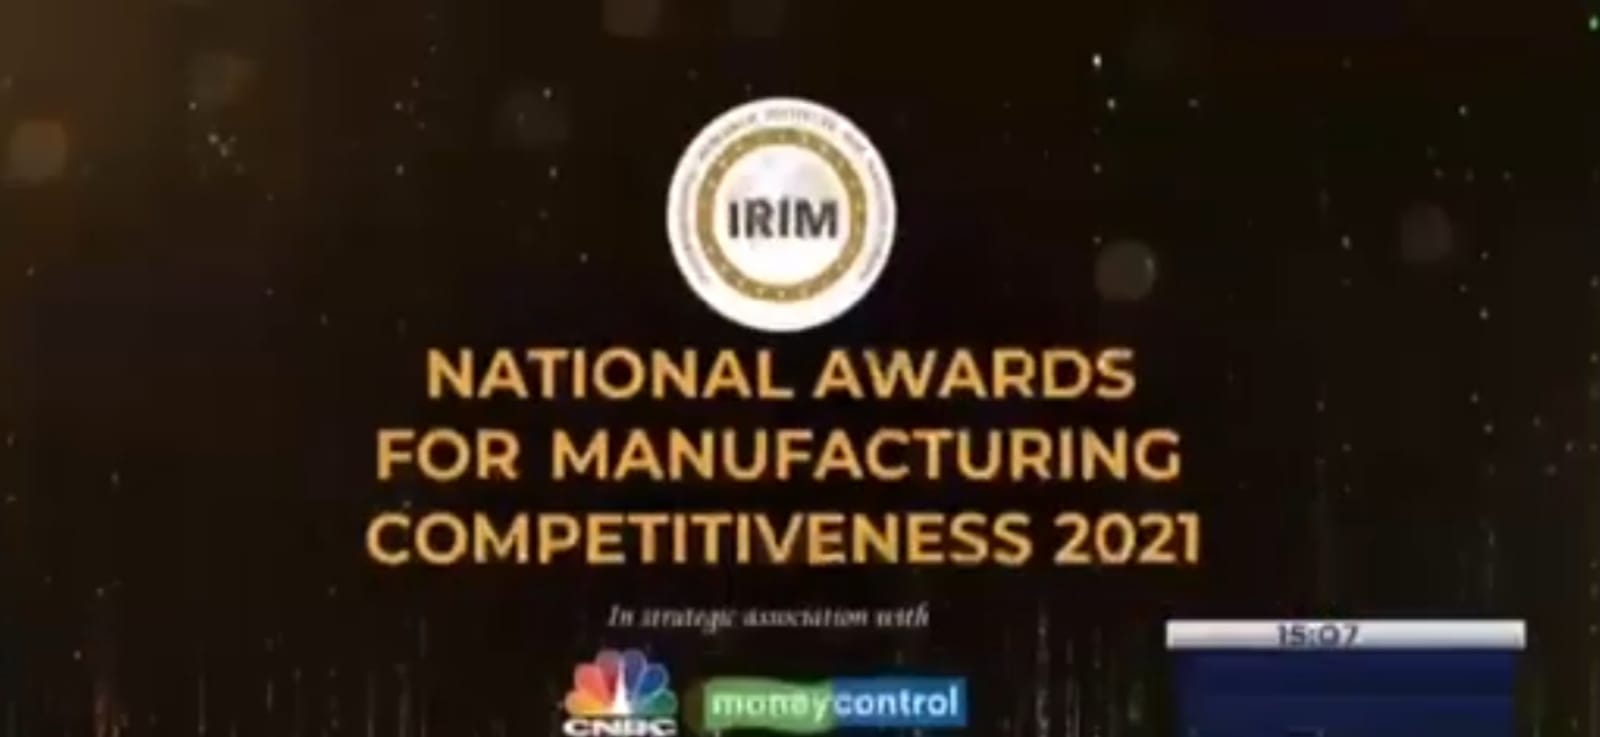 Lupin’s Pithampur and Mandideep Facility Wins Gold at the National Awards for Manufacturing Competitiveness (NAMC) 2021, and a Special Award for Advanced Manufacturing Systems